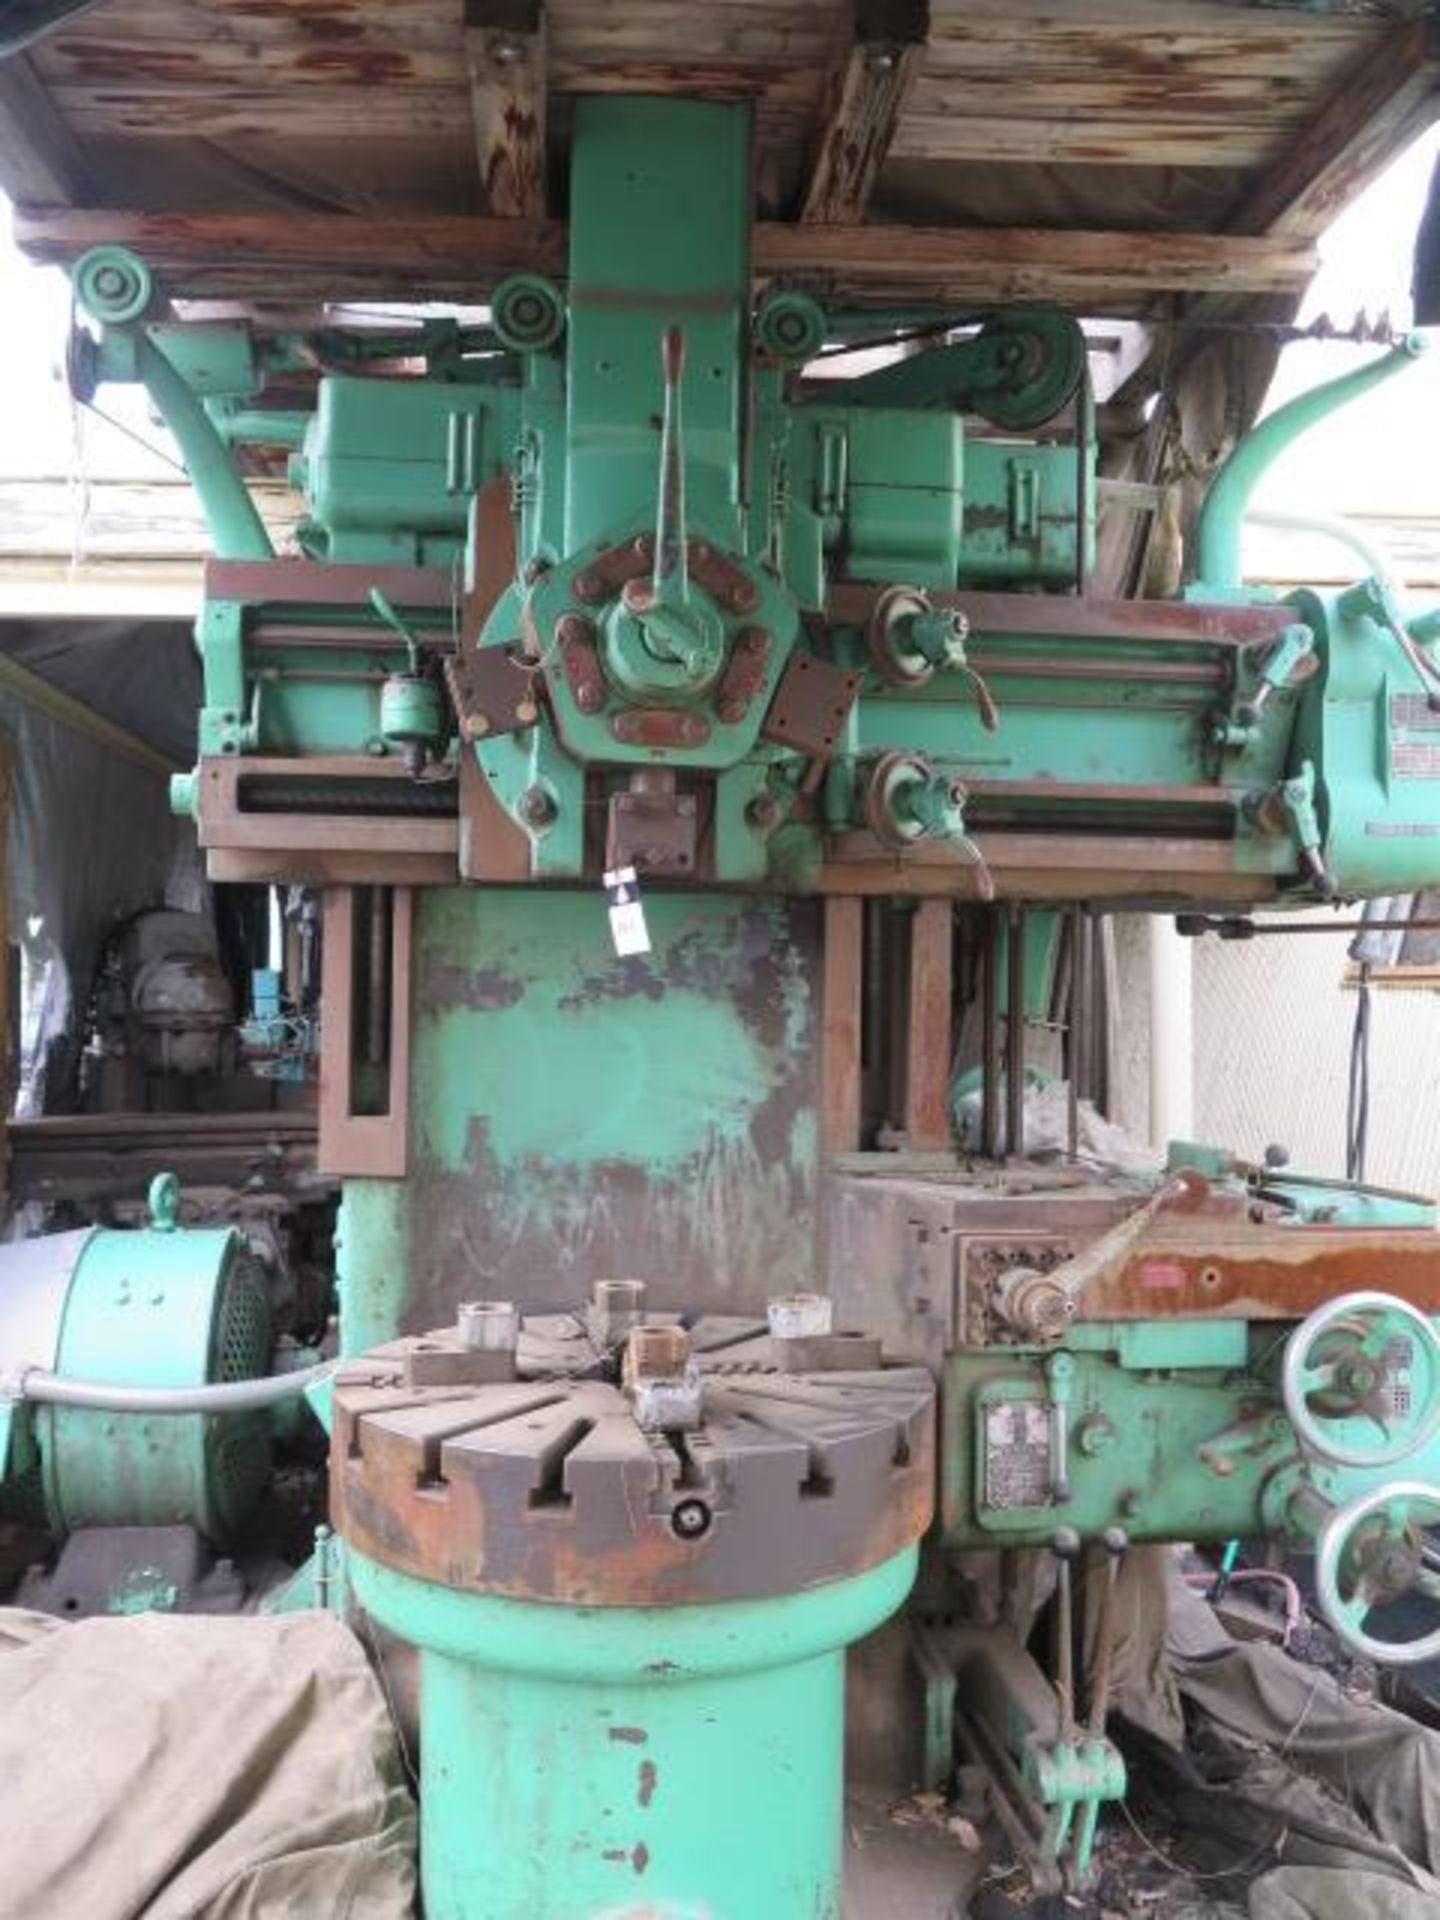 King 36" Vertical Turret Lathe s/n 2615 w/ 5-Station Indexing Head, Facing / Turning Head,SOLD AS IS - Image 2 of 14